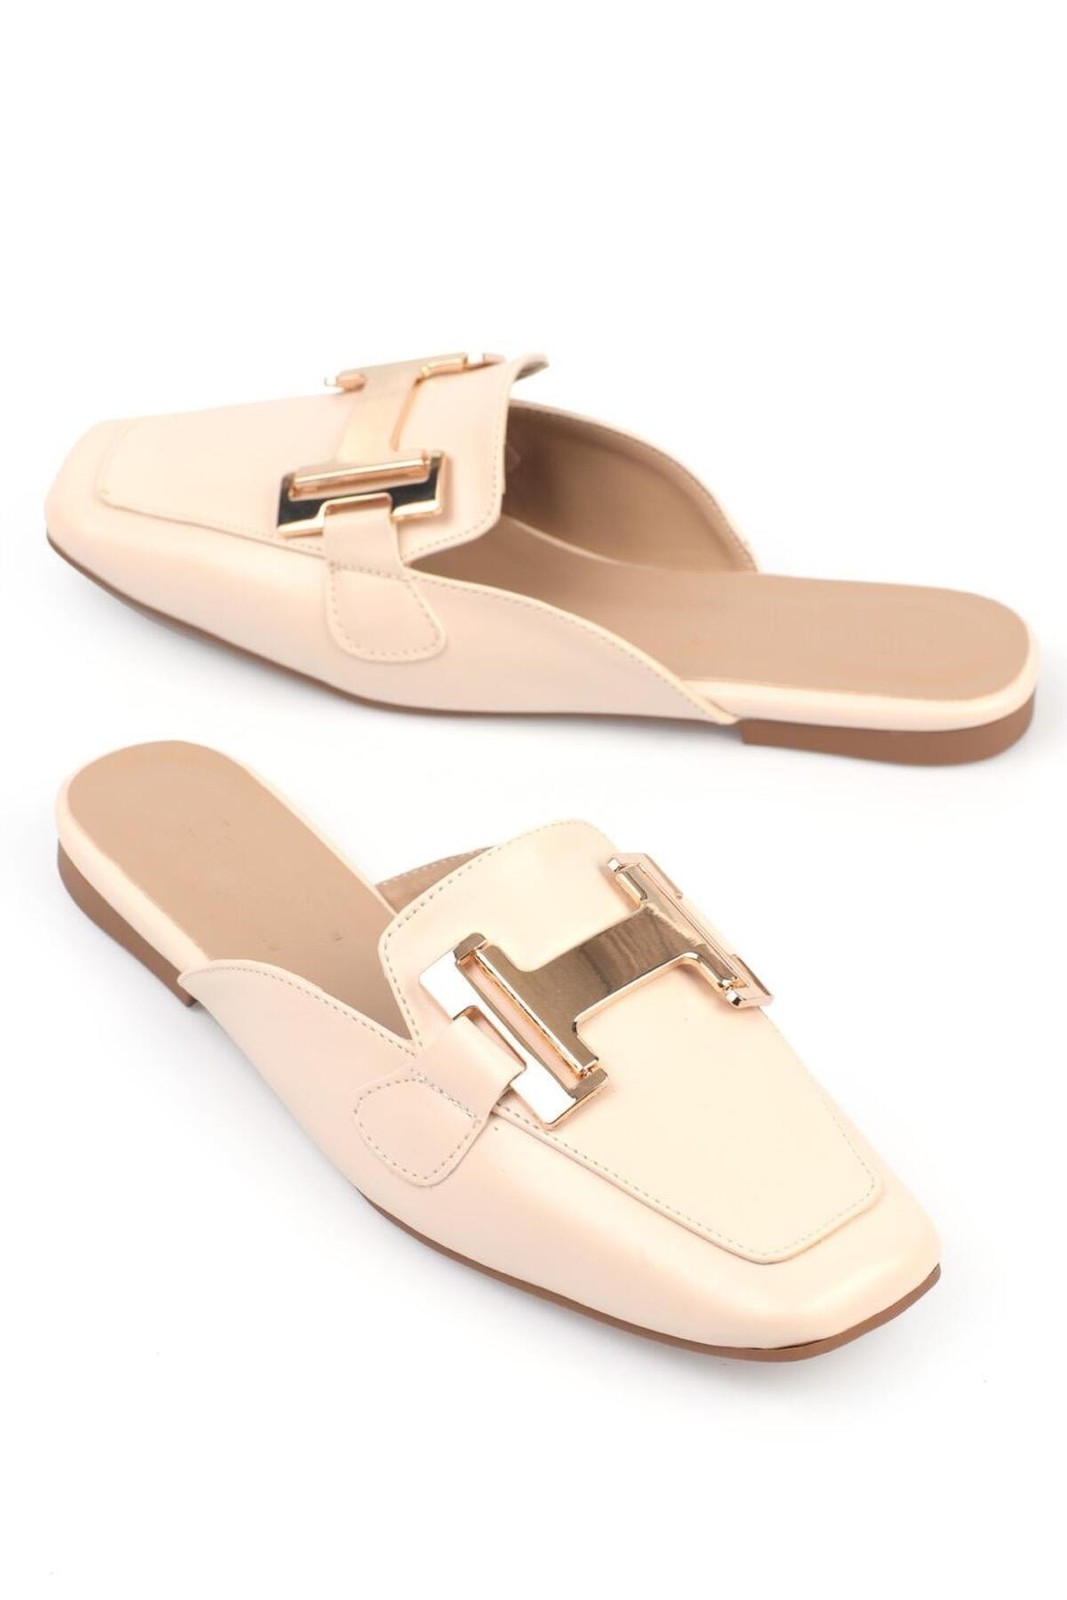 Capone Outfitters Capone Flat Toe Women's Ecru Beige Slippers with Metal Accessories